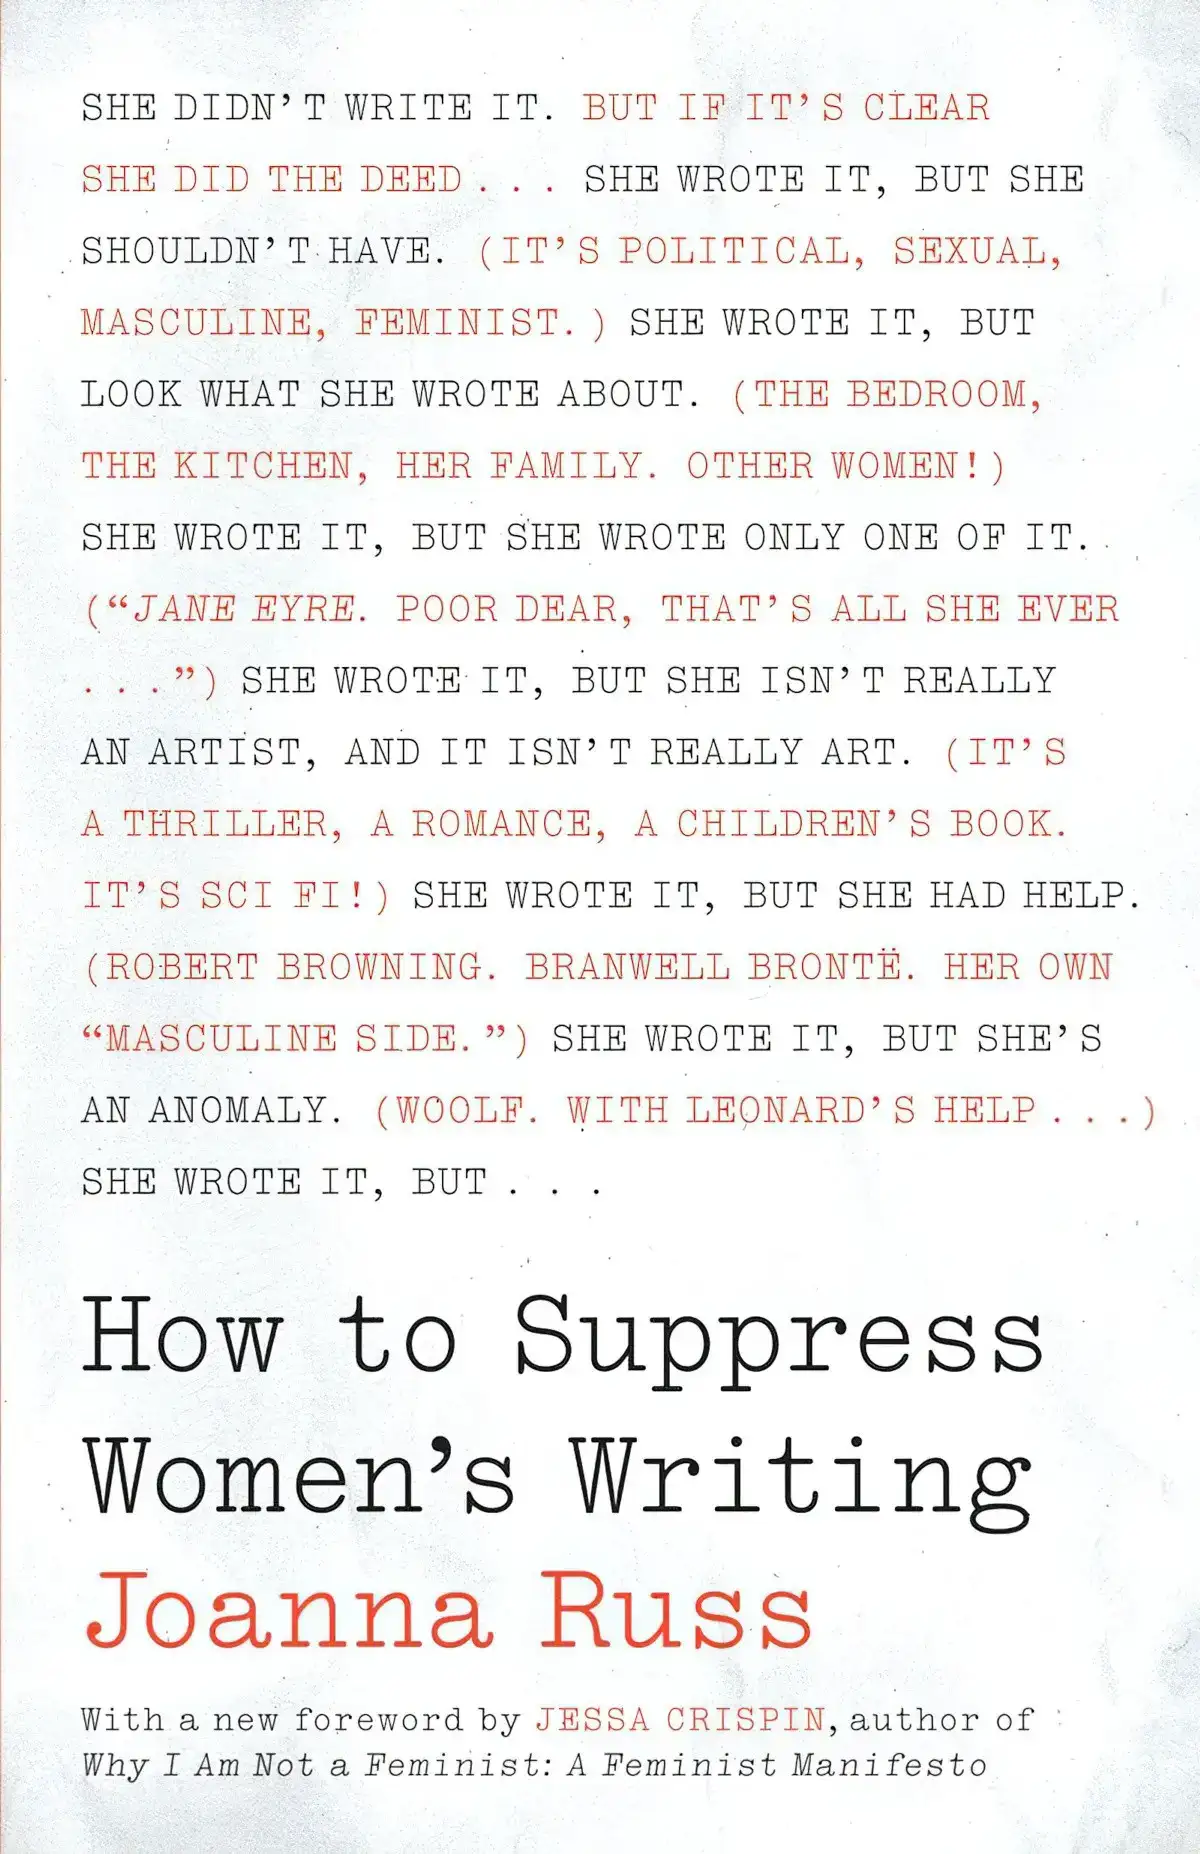 How to Suppress Women's Writing by Joanna Russ book cover